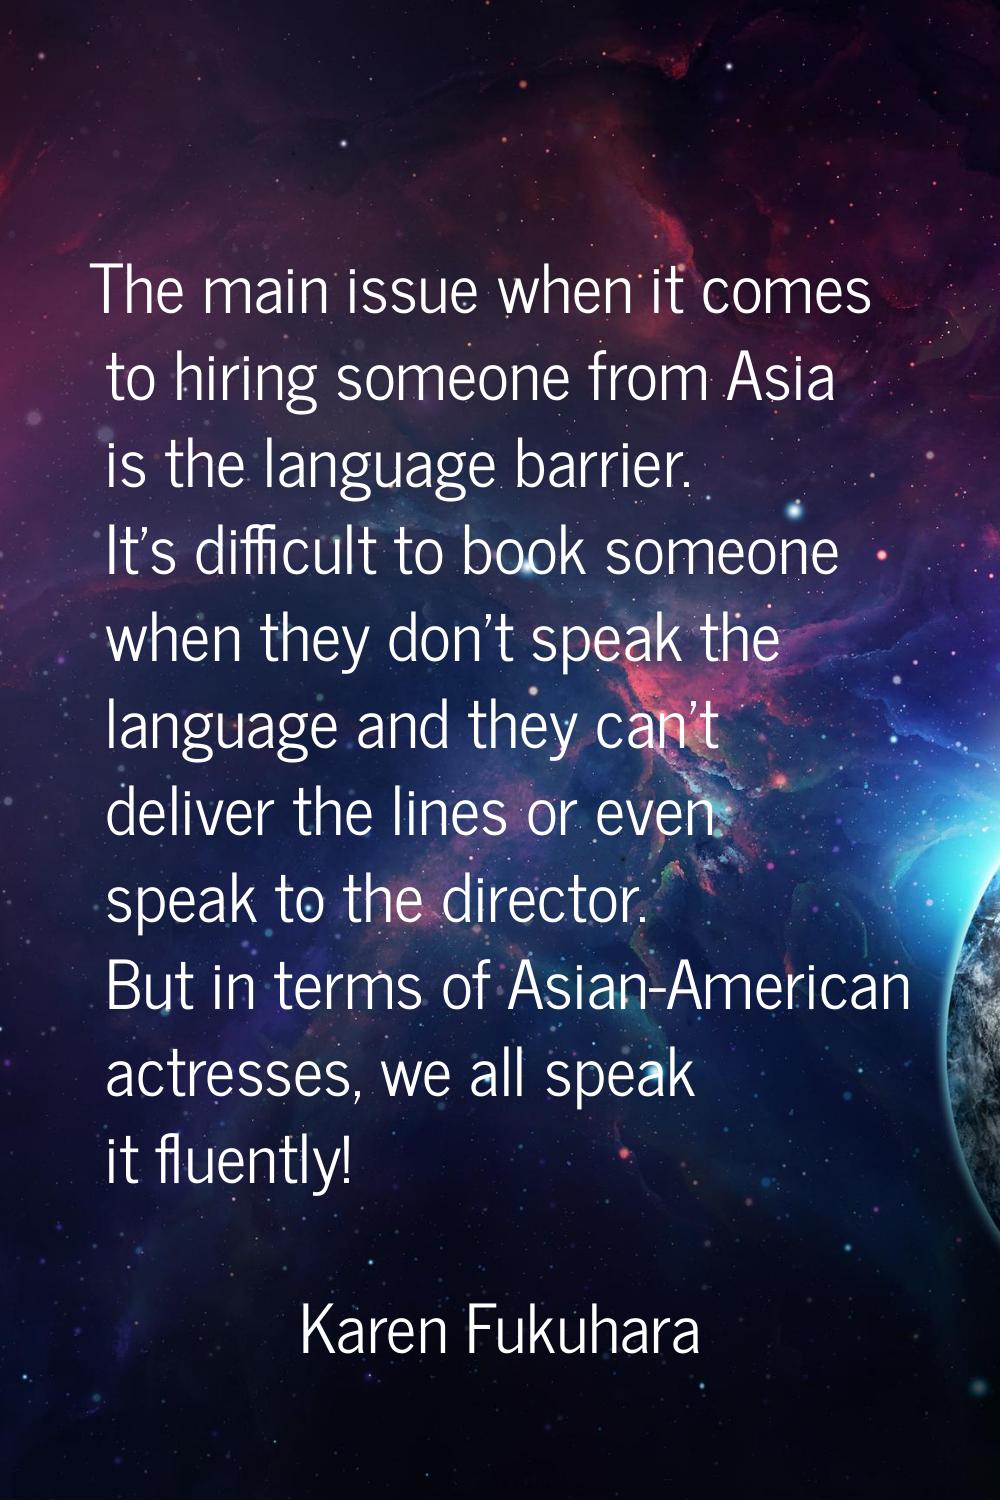 The main issue when it comes to hiring someone from Asia is the language barrier. It's difficult to